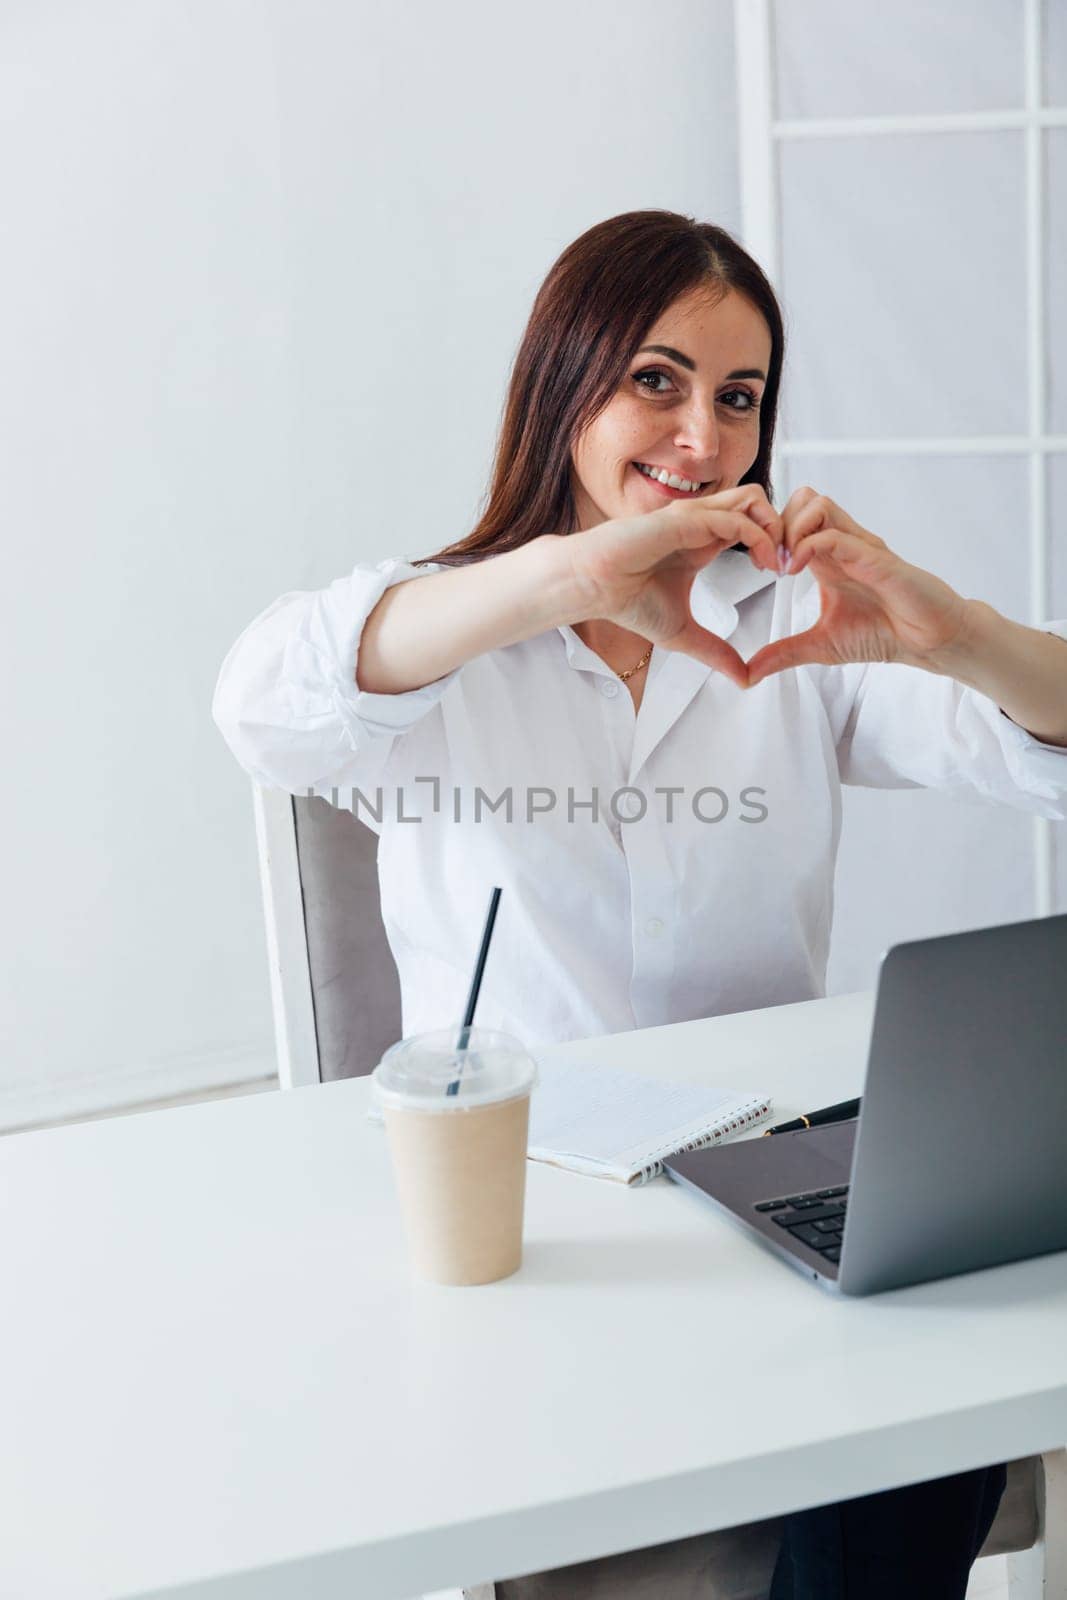 Beautiful businesswoman rejoicing, smiling and waving her arms